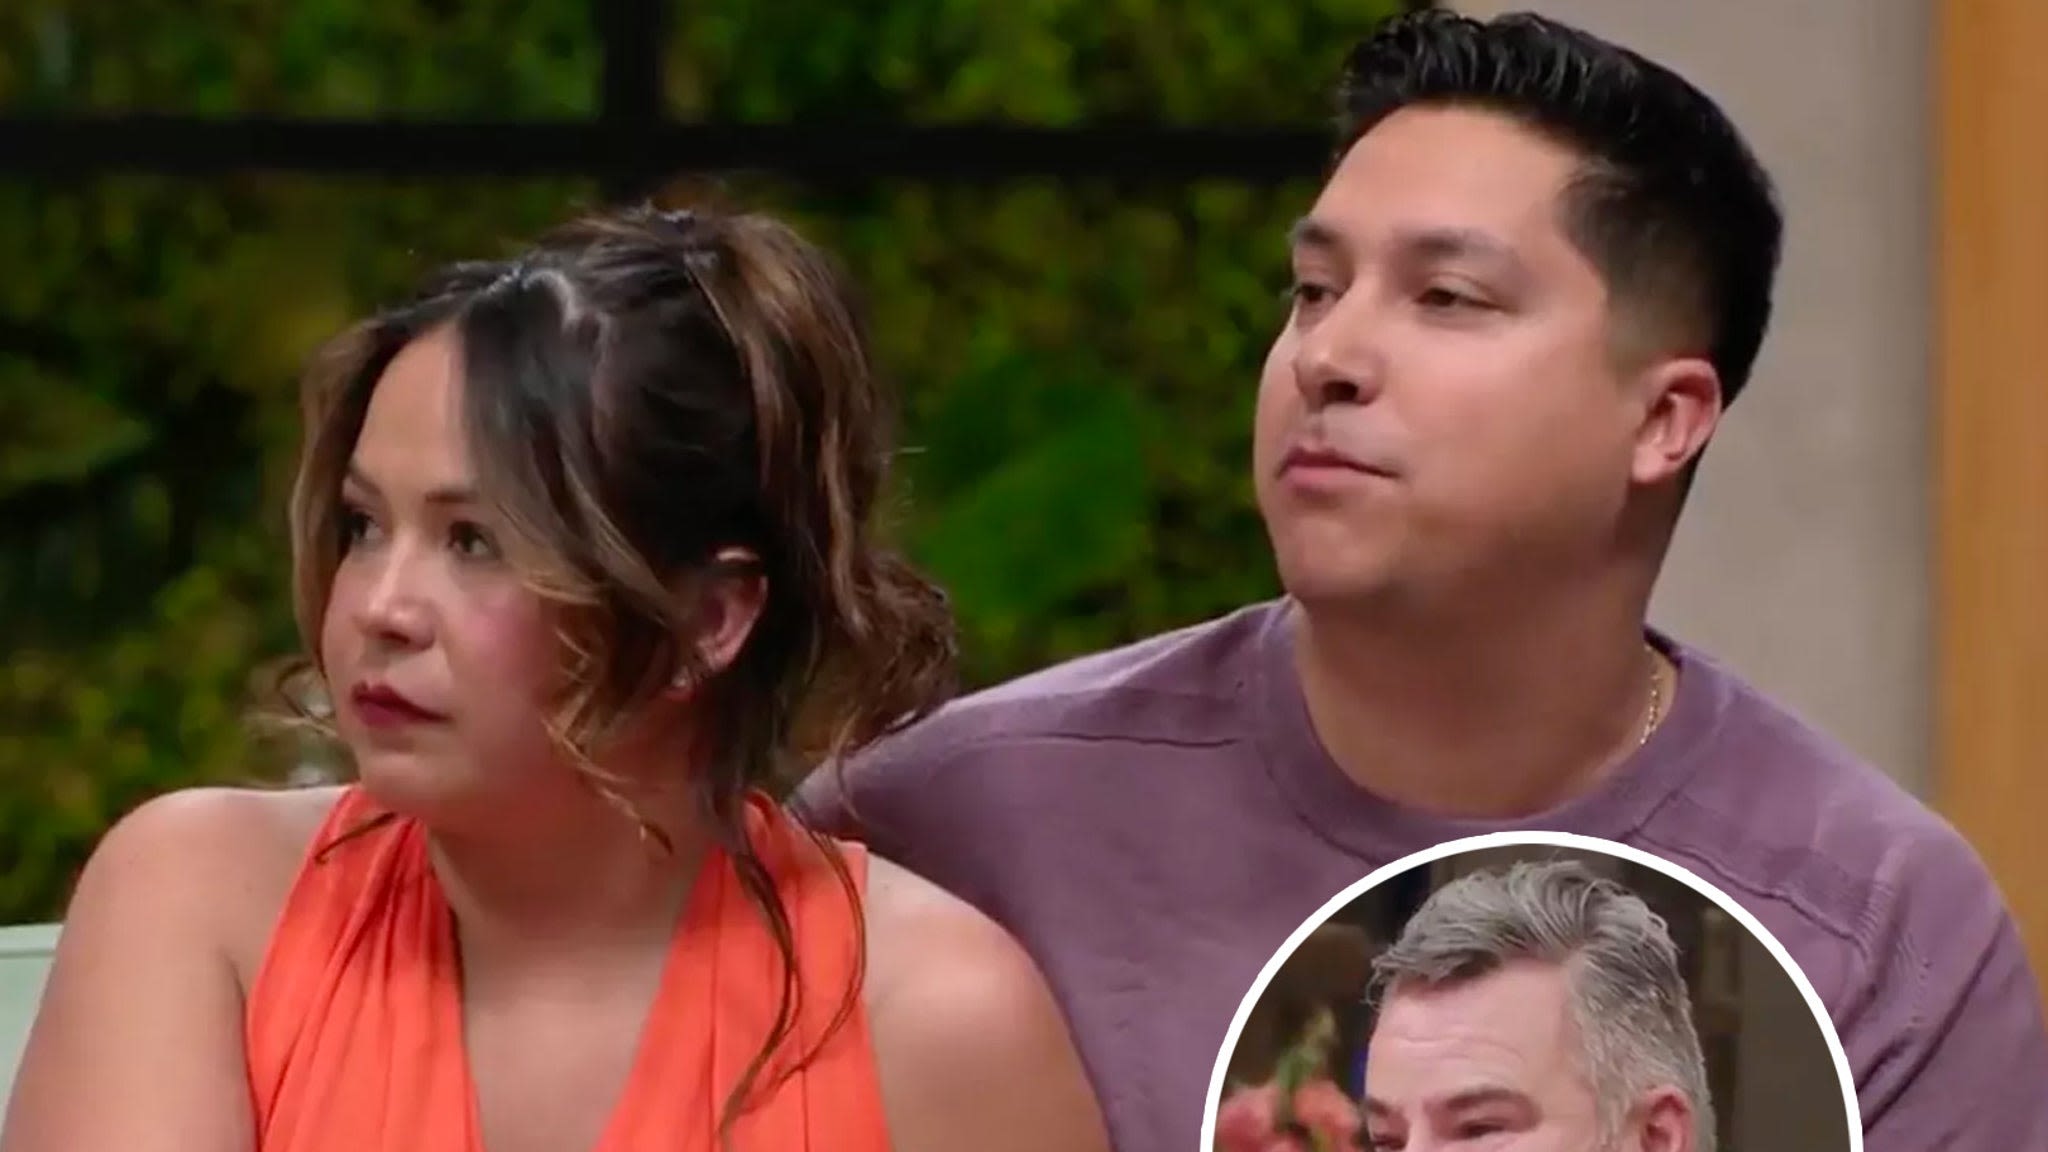 90 Day Fiancé's Liz Shares NSFW Details About Sex with Big Ed After 'Sloppy Seconds' Remark About Her New Boyfriend